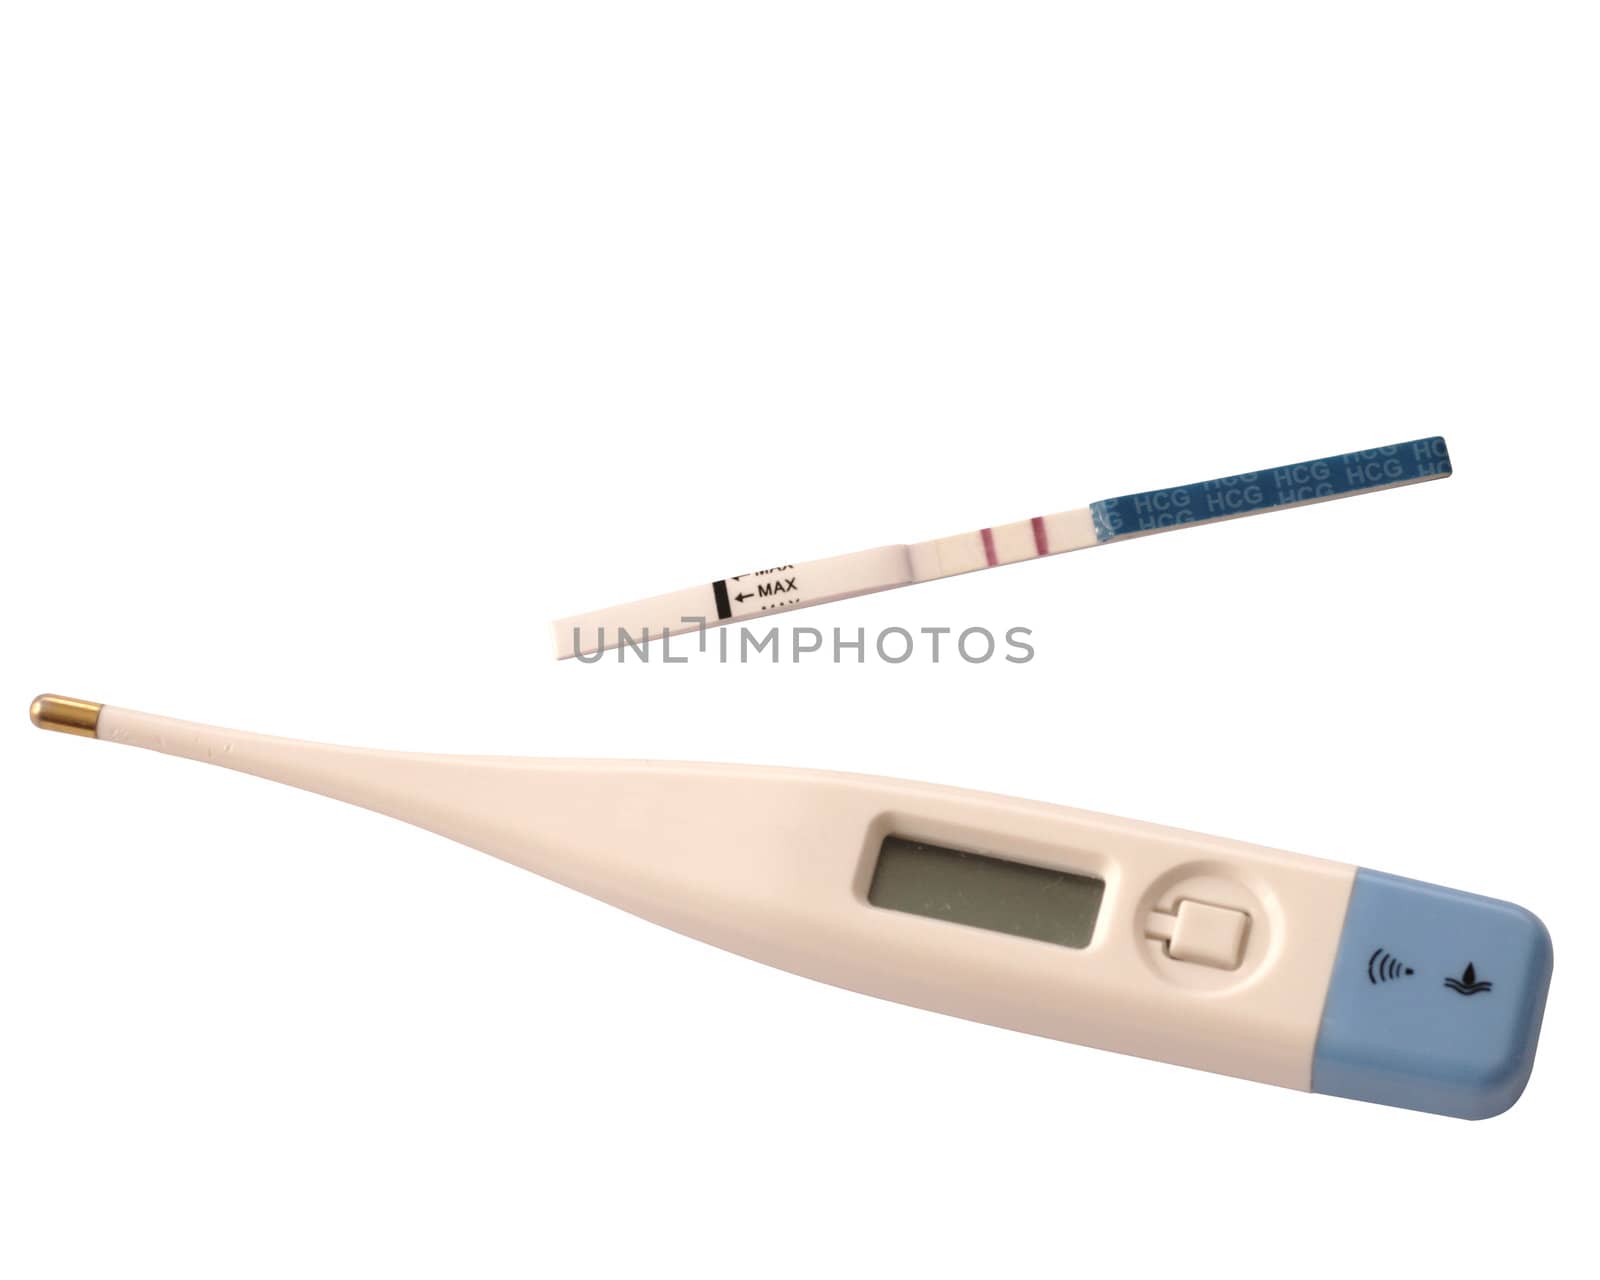 test on pregnancy and thermometer